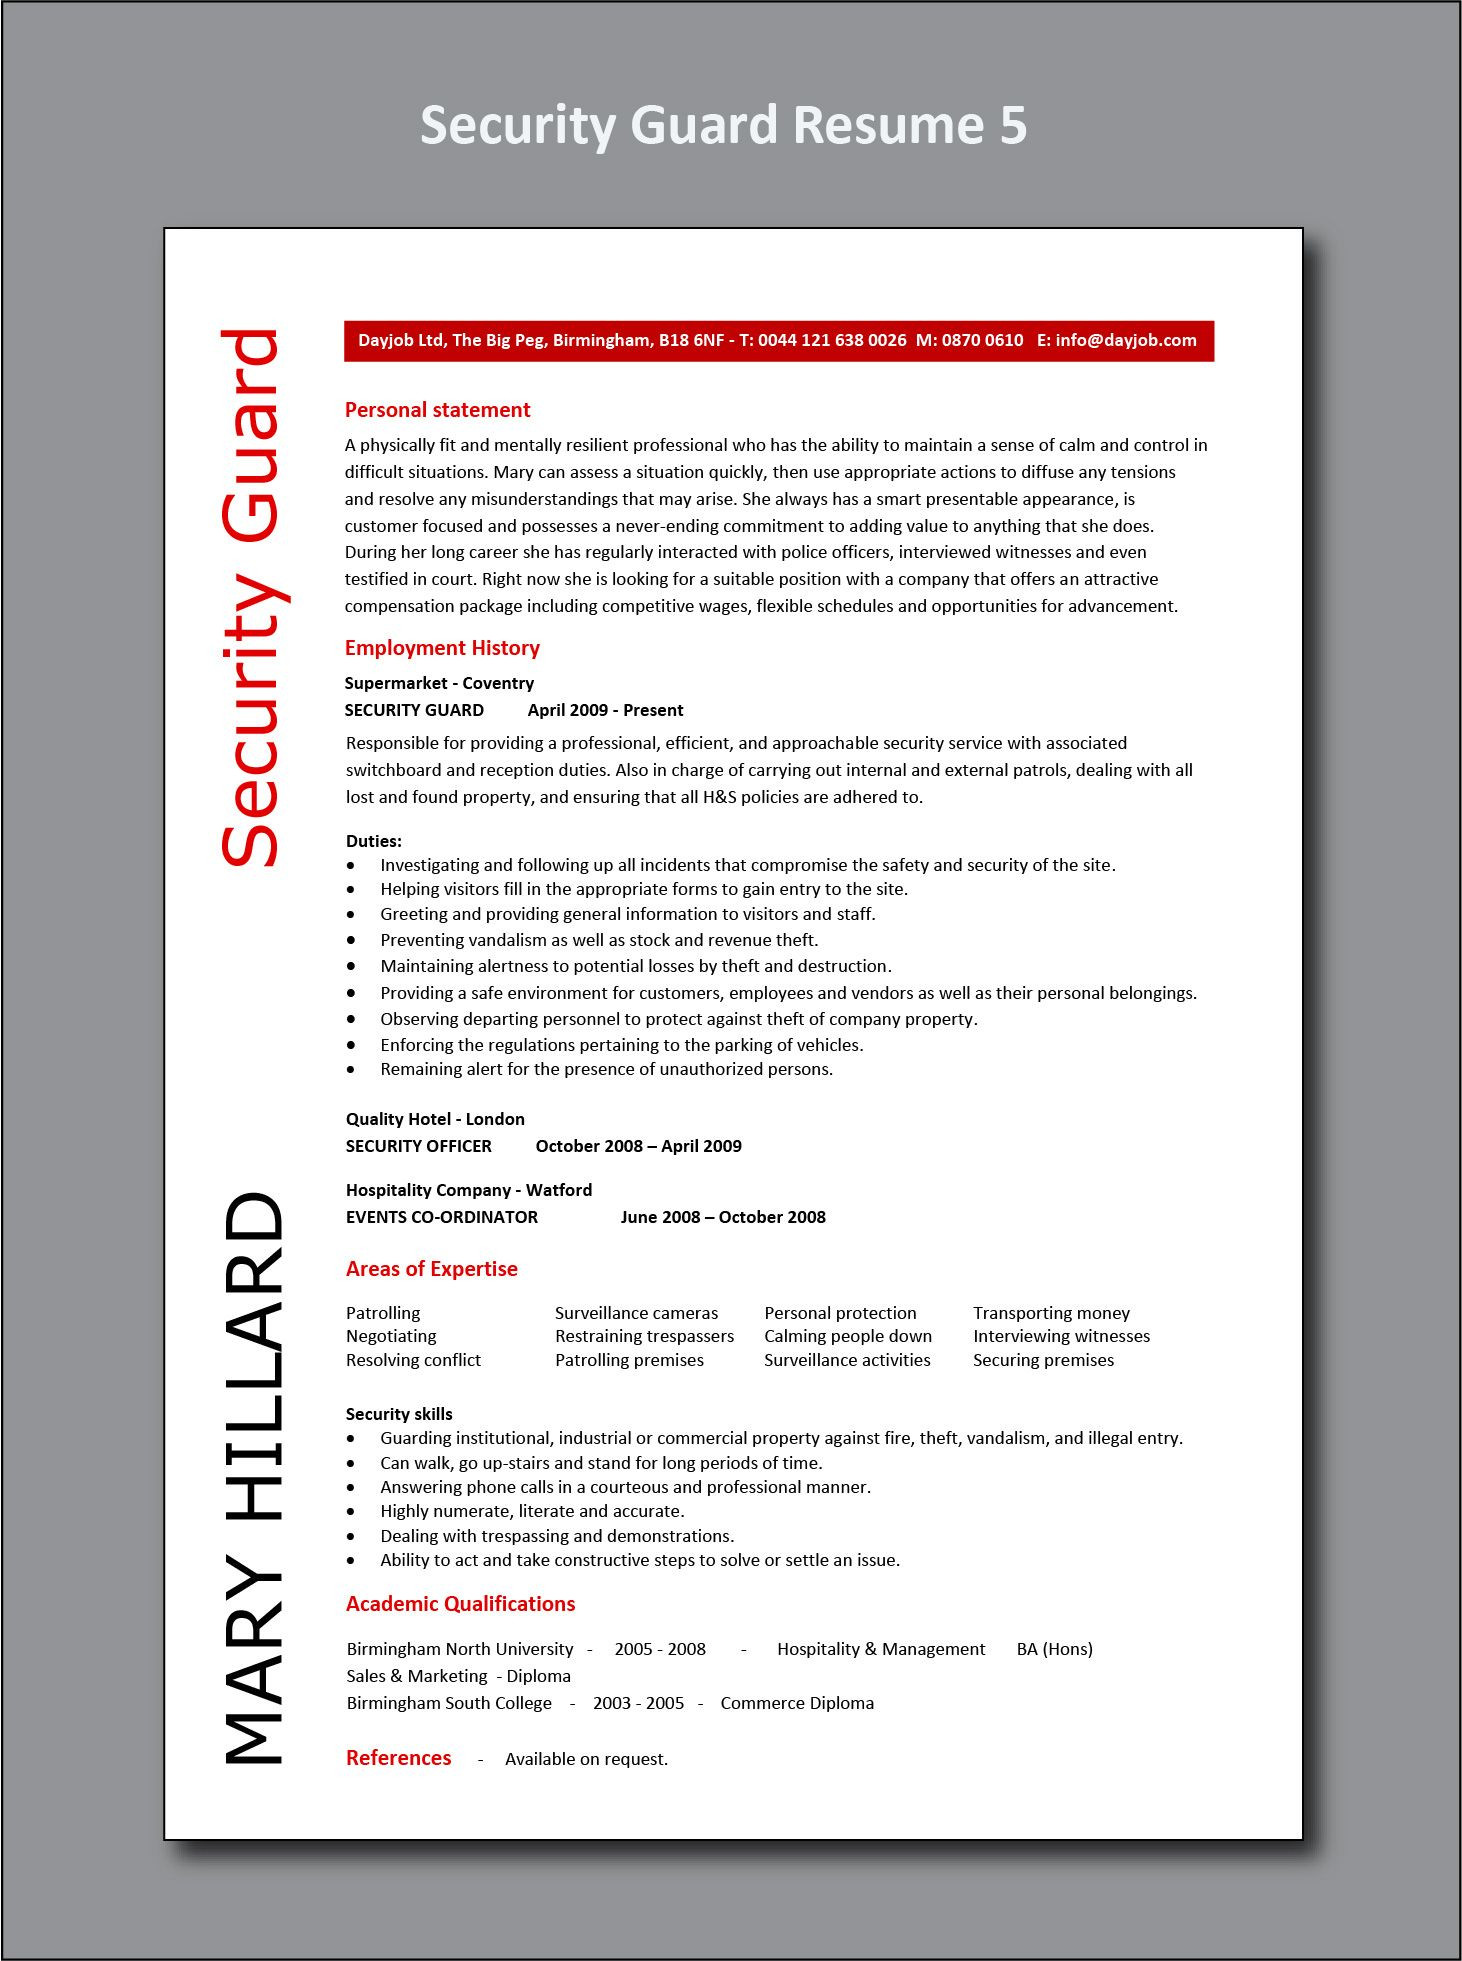 Security Officer Sample Resume No Experience Security Guard Resume 5 Example Operations Management, Resume …